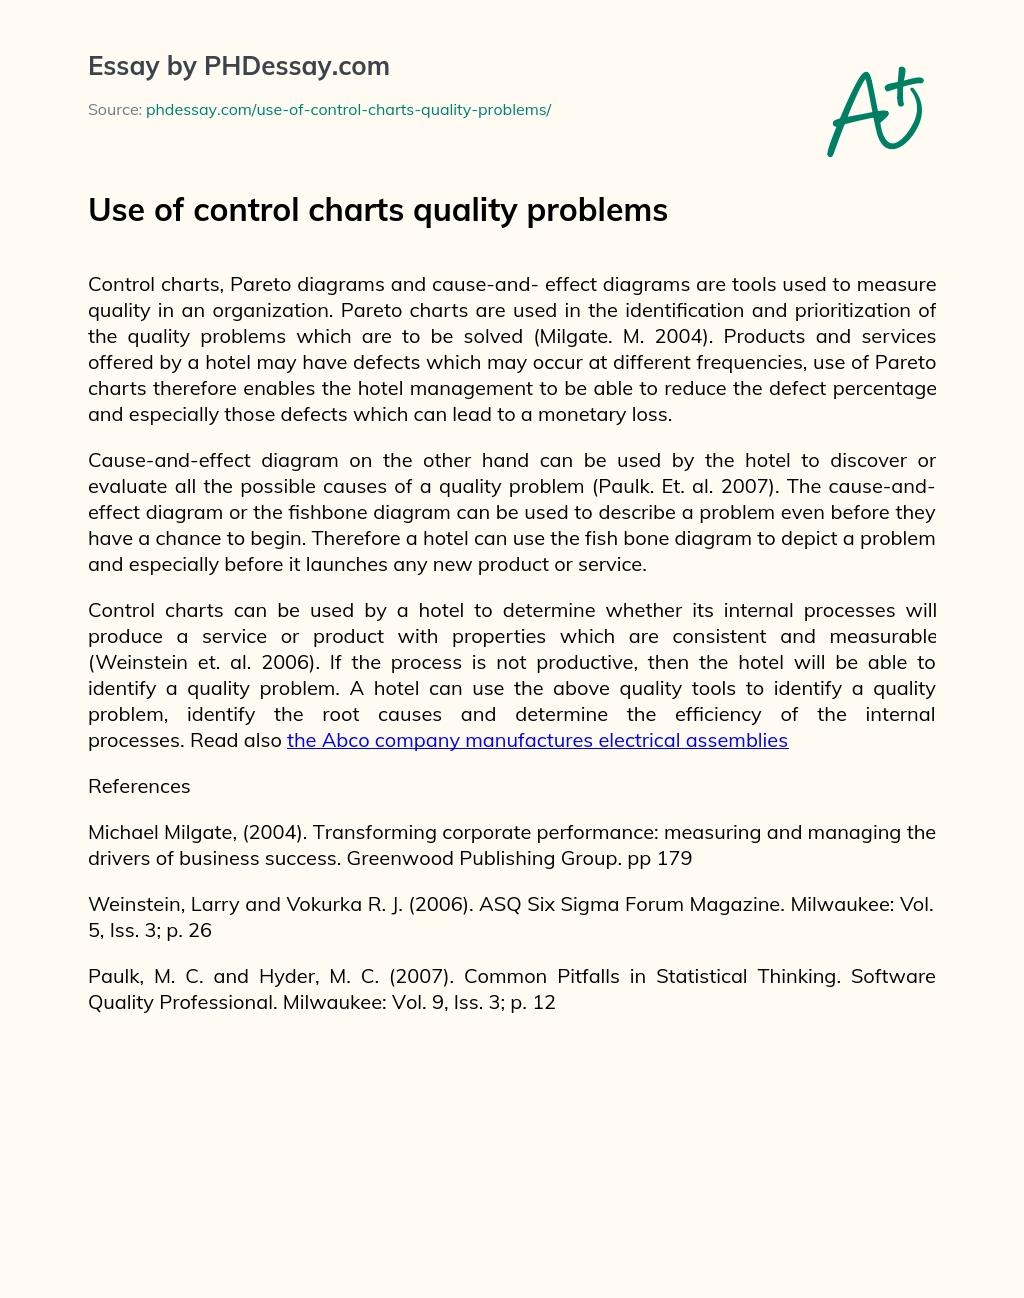 Use of control charts quality problems essay